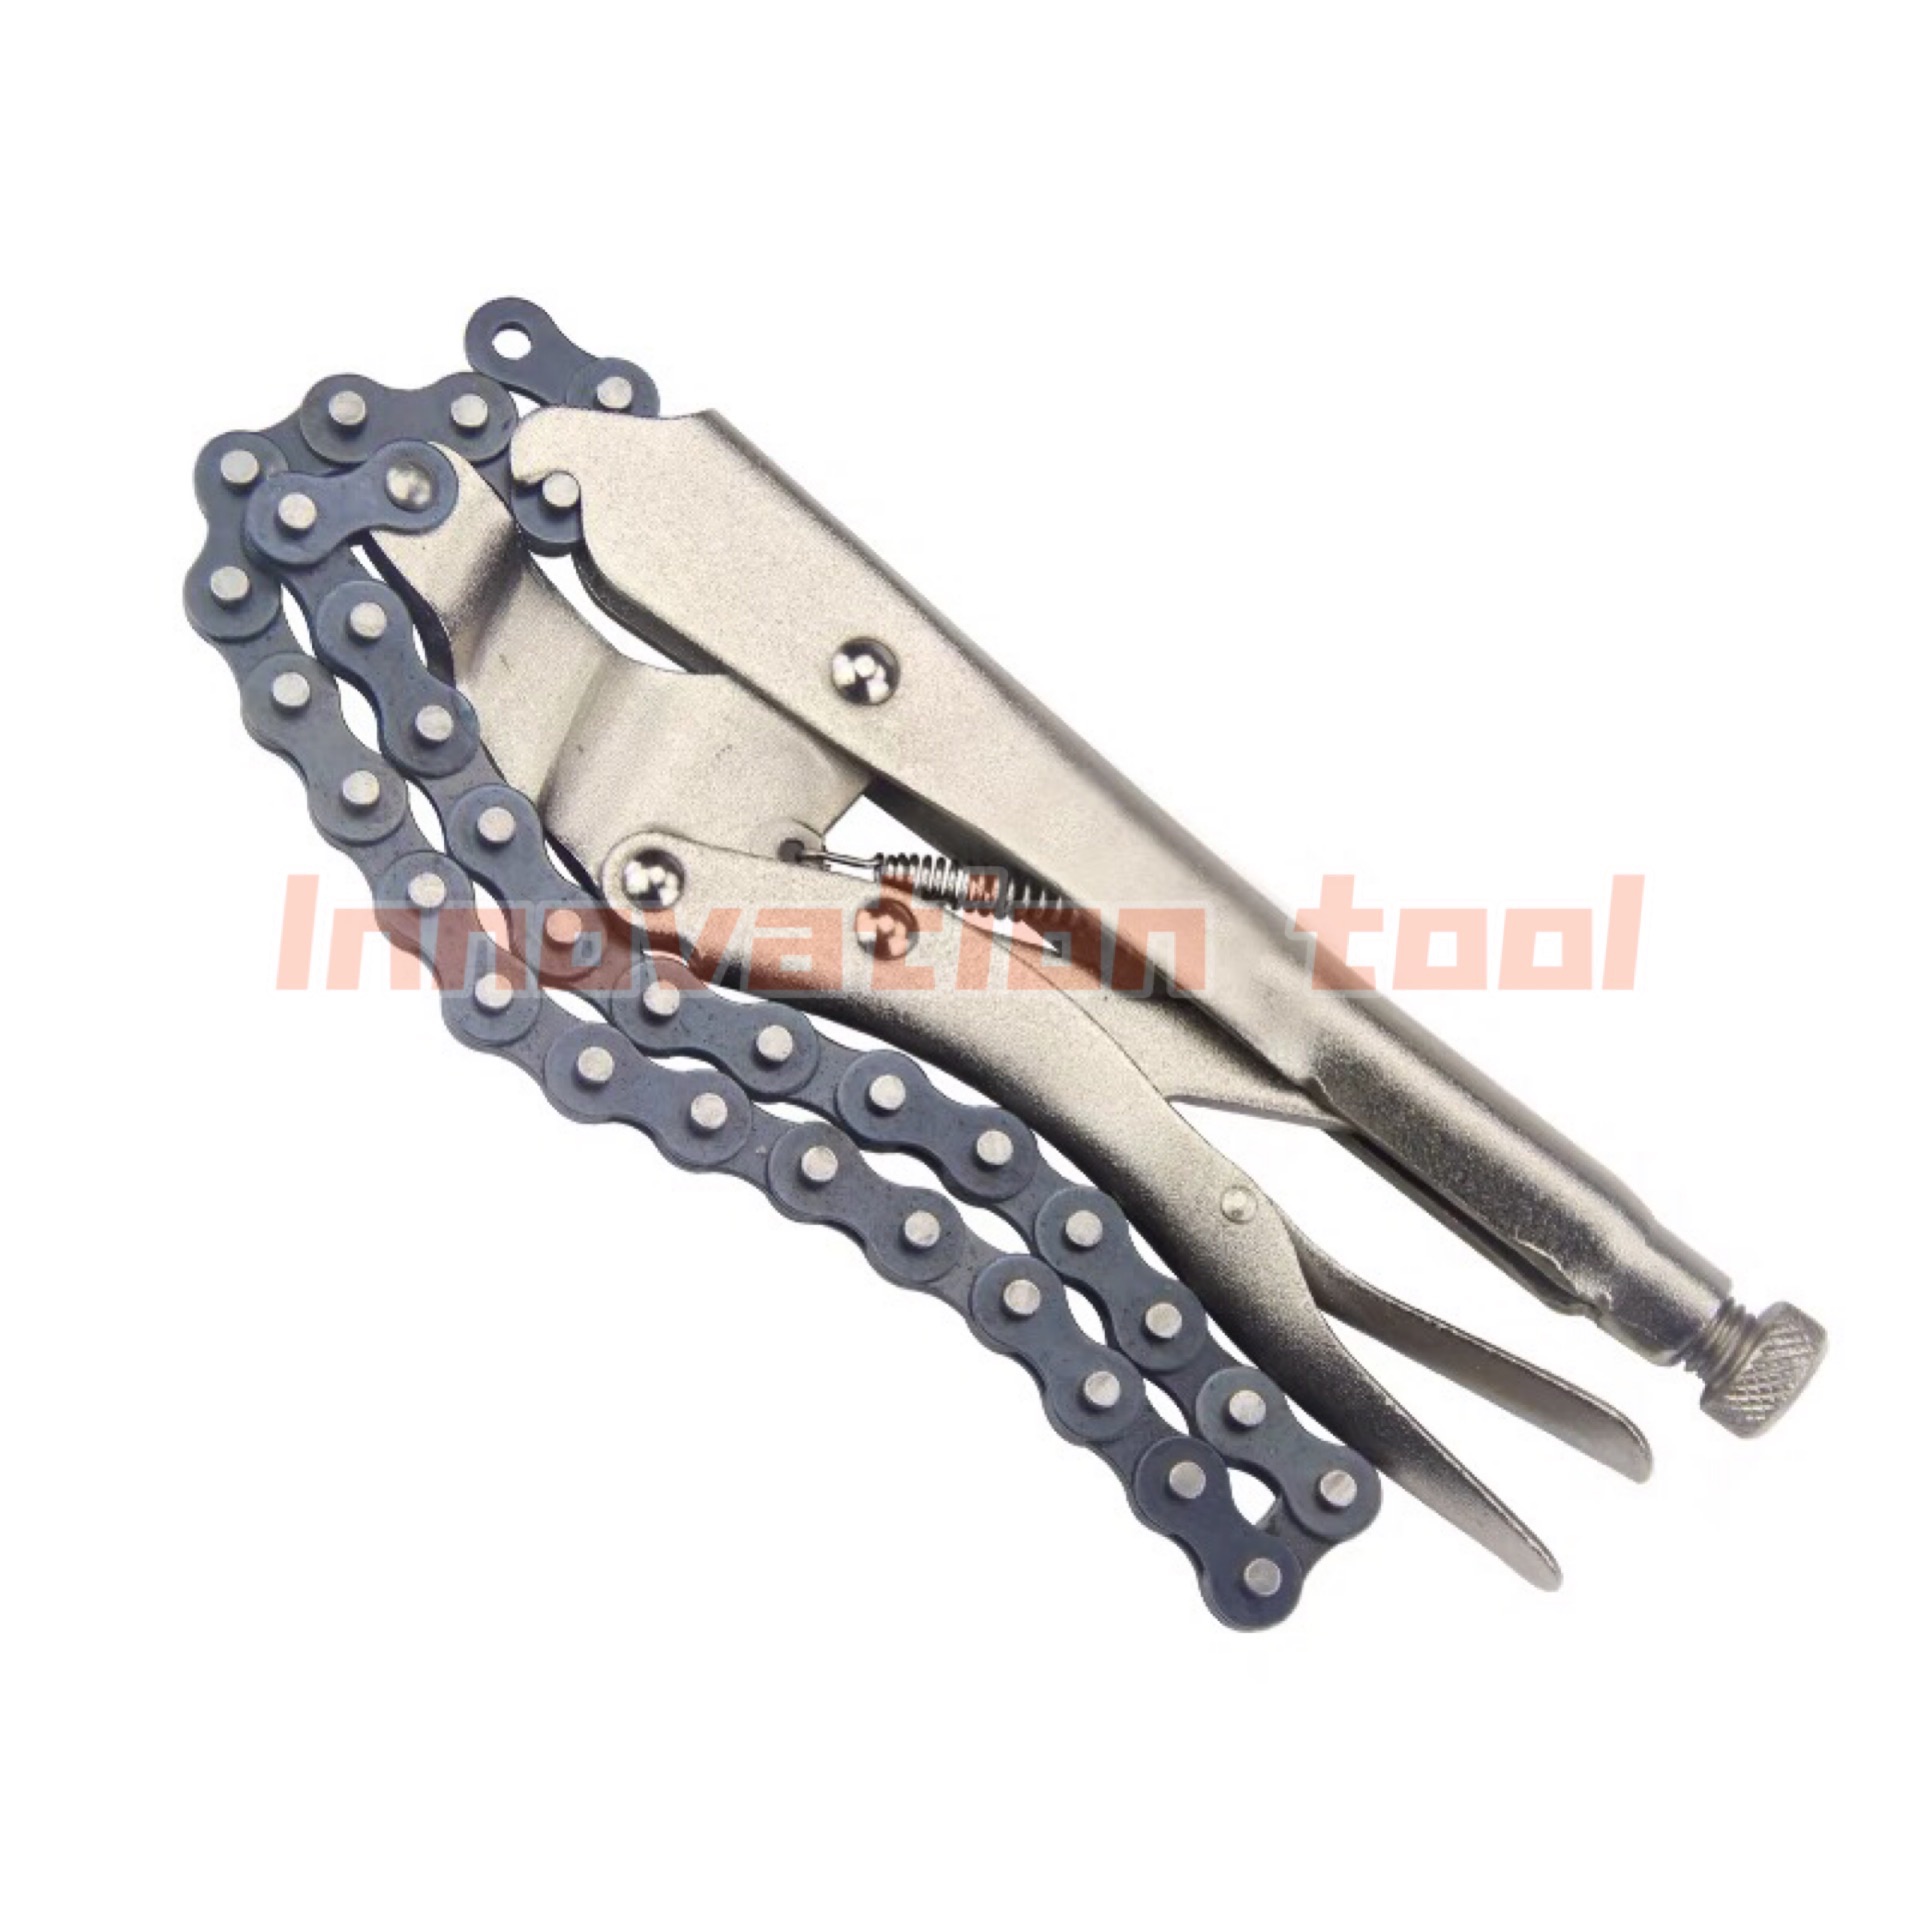 Multifunction Pliers Bag Chain Disassembler Clamp Pliers Diy Wire